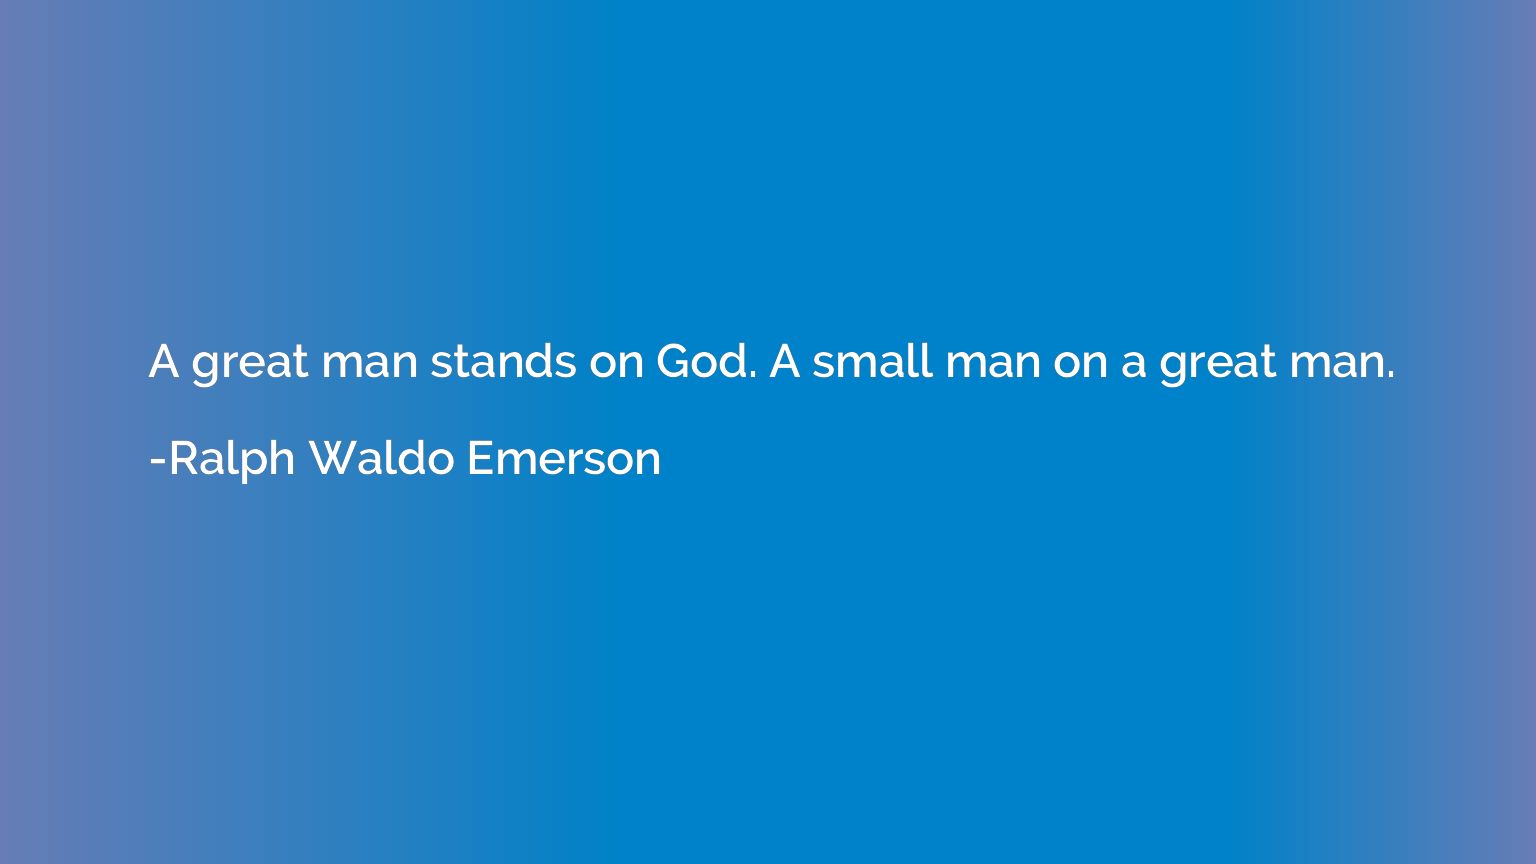 A great man stands on God. A small man on a great man.